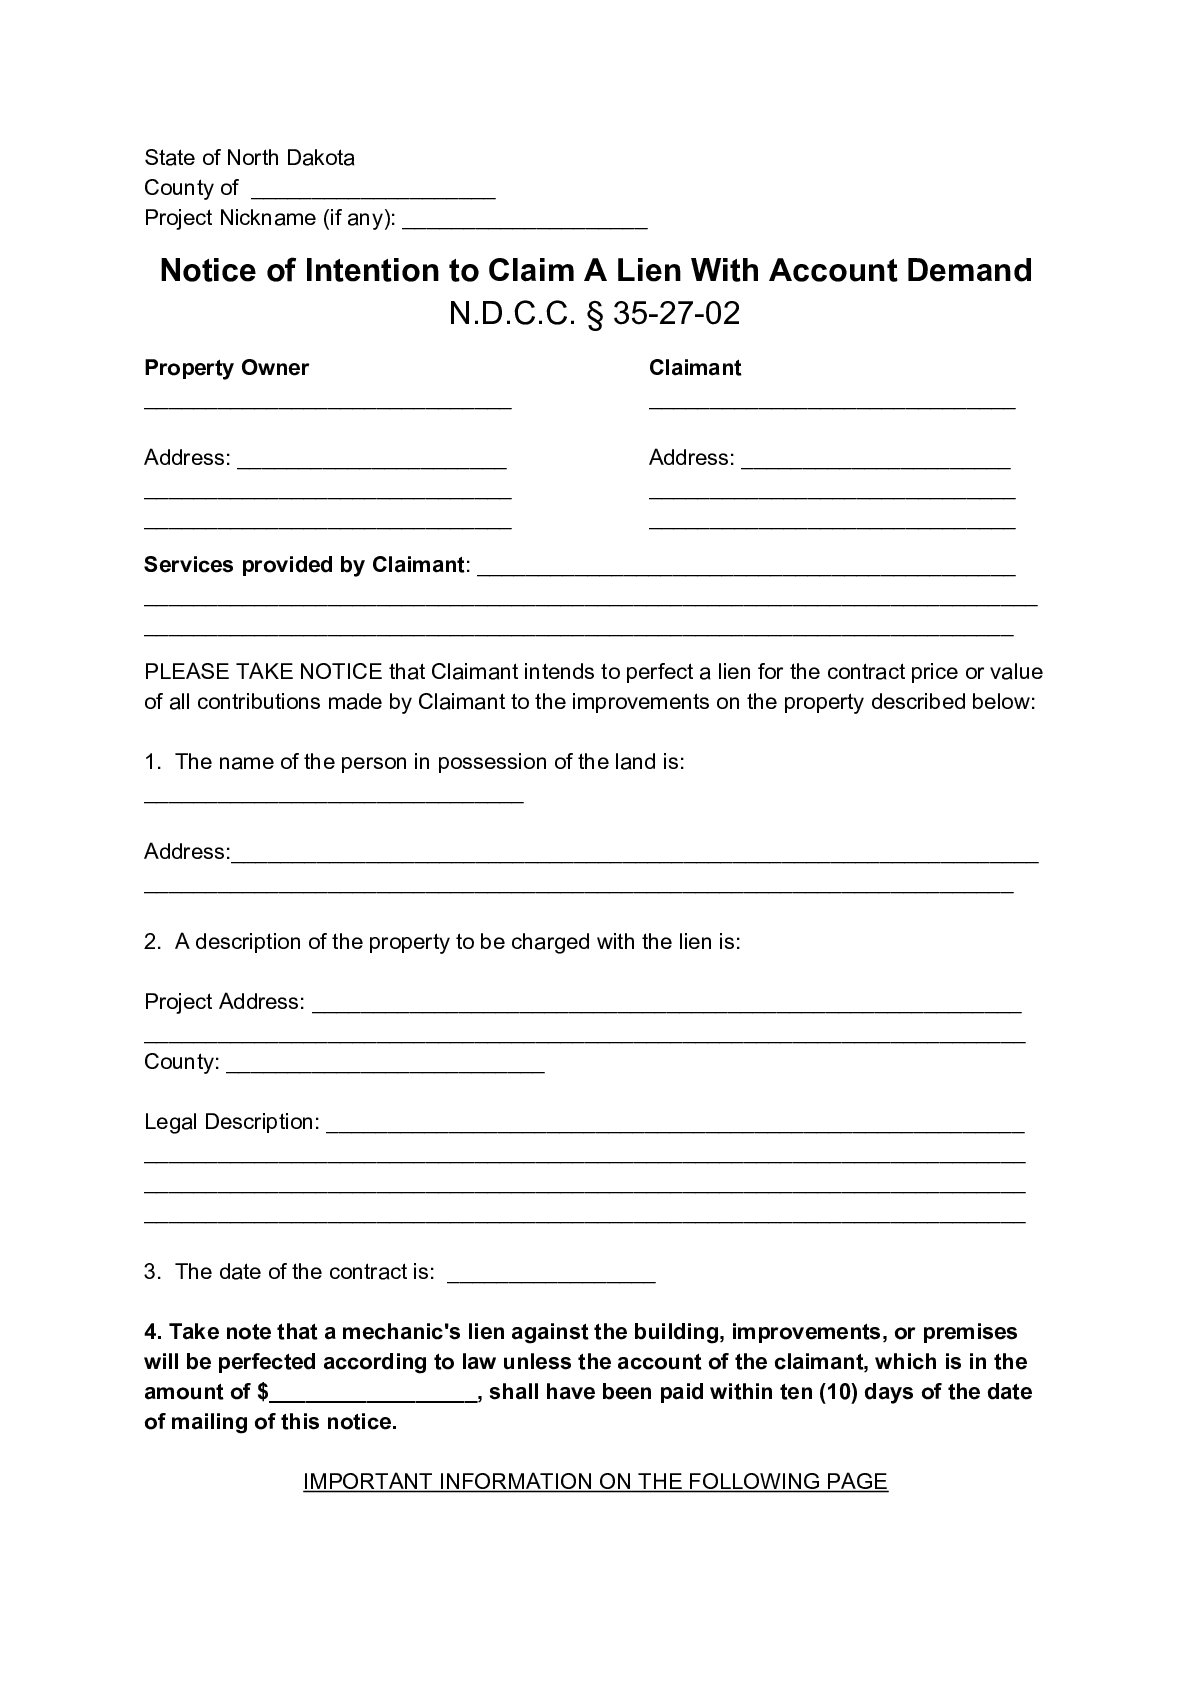 North Dakota Notice of Intent to Lien Form | Free Downloadable Template - free from